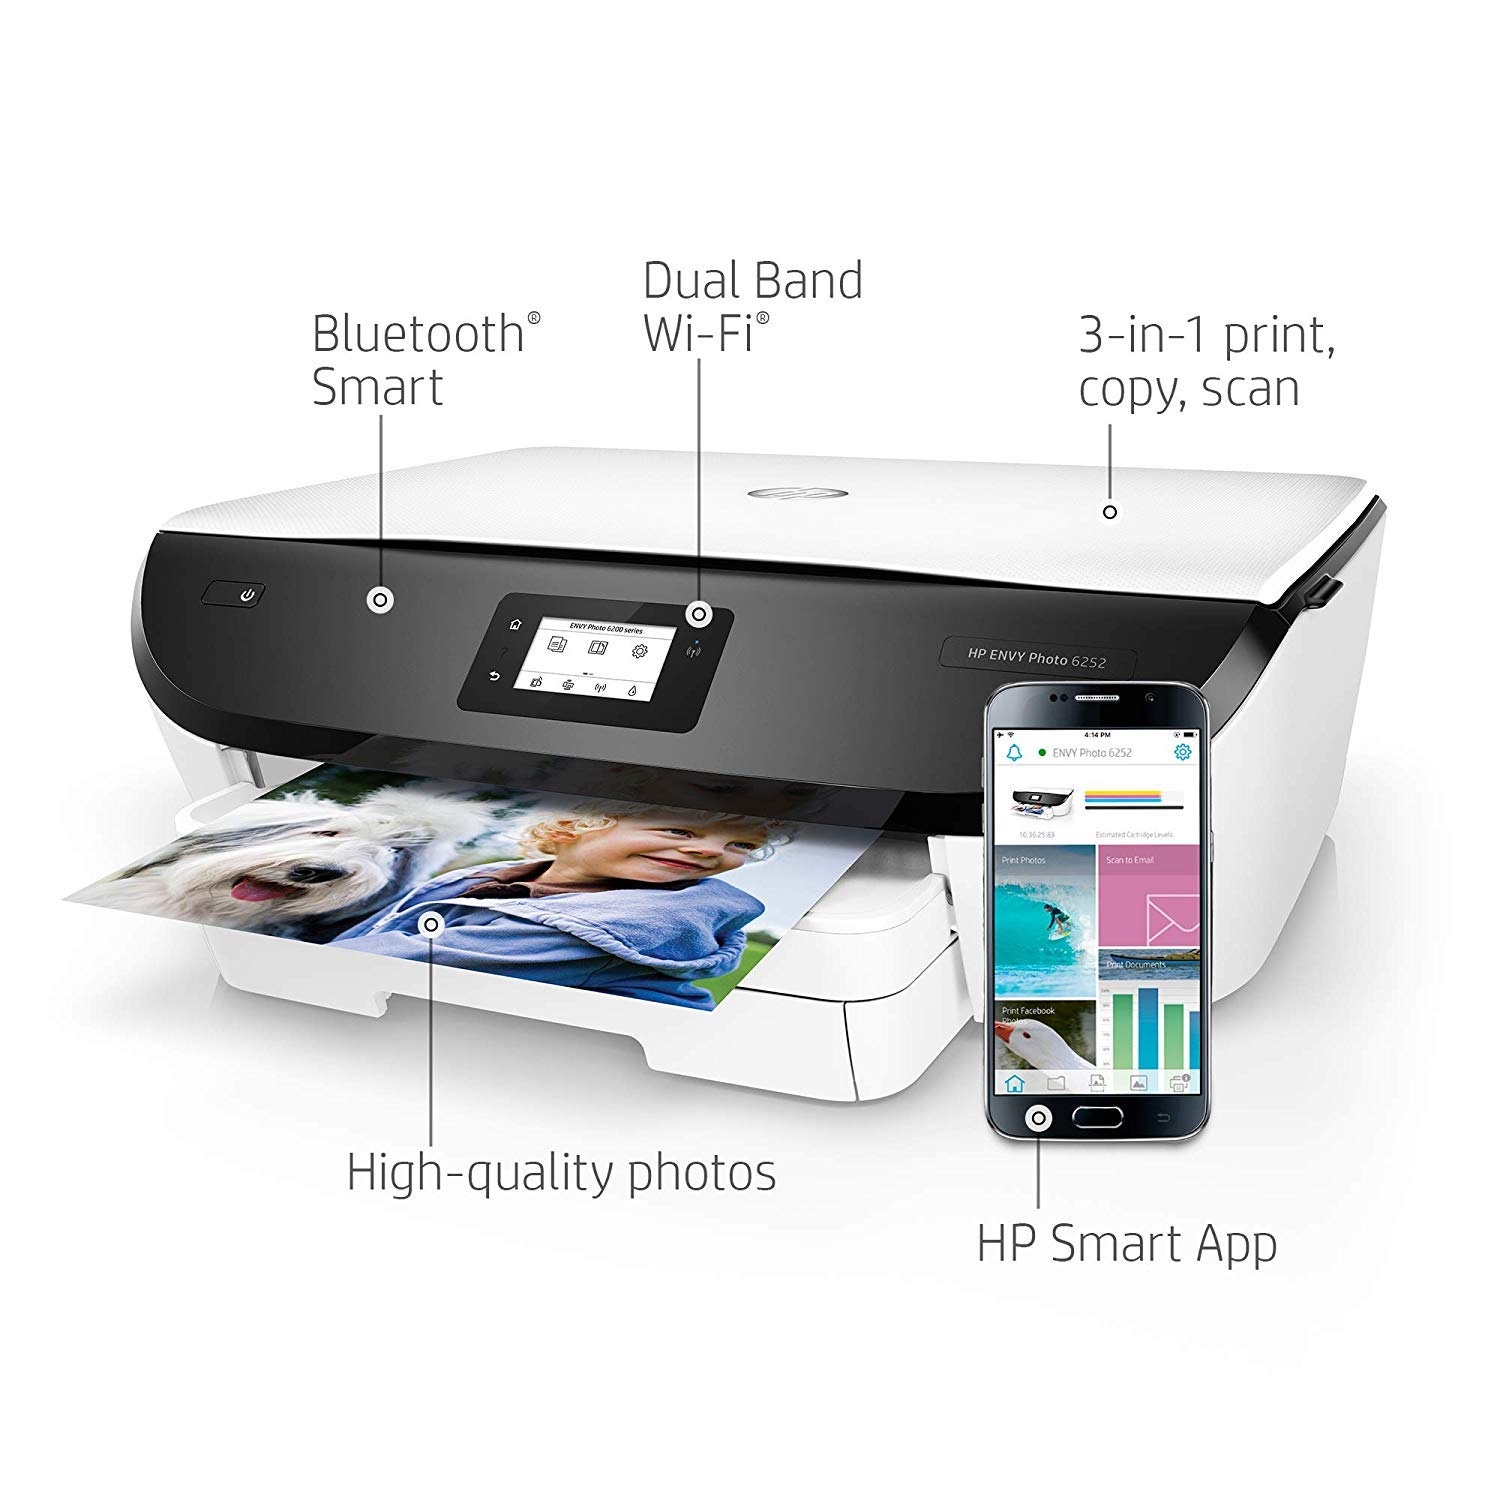 ENVY Photo 6252 All-in-One Printer